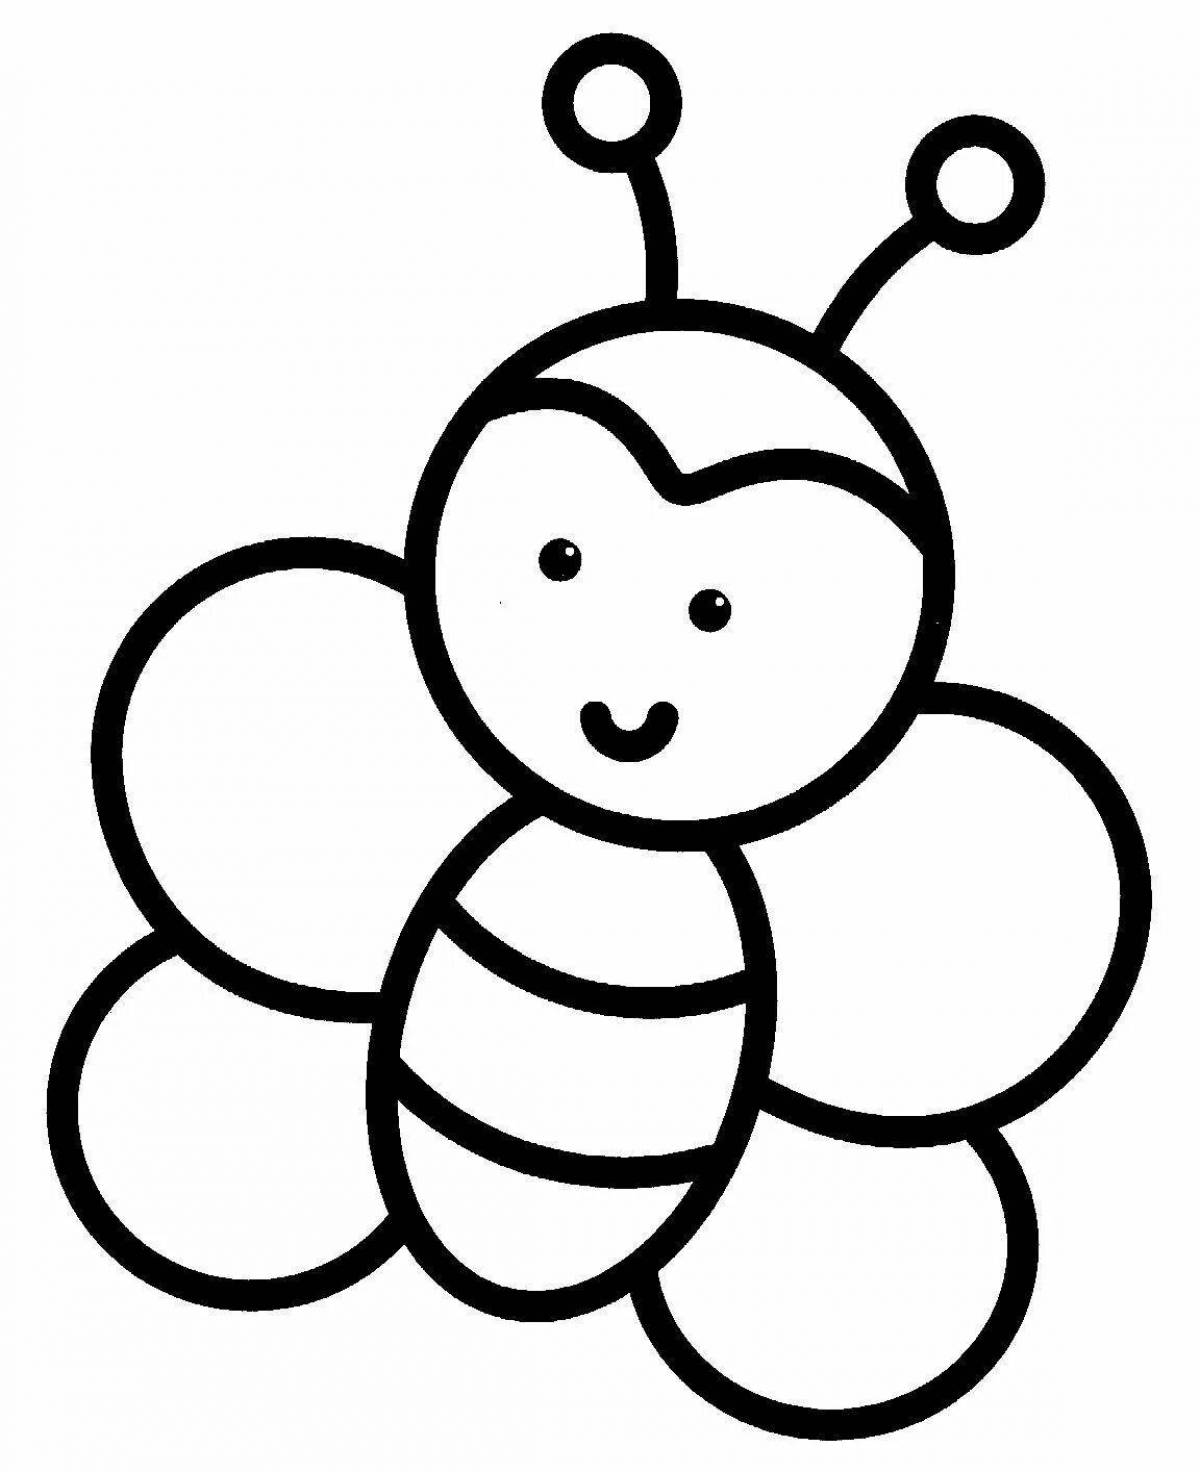 Fabulous thick outline coloring book for toddlers